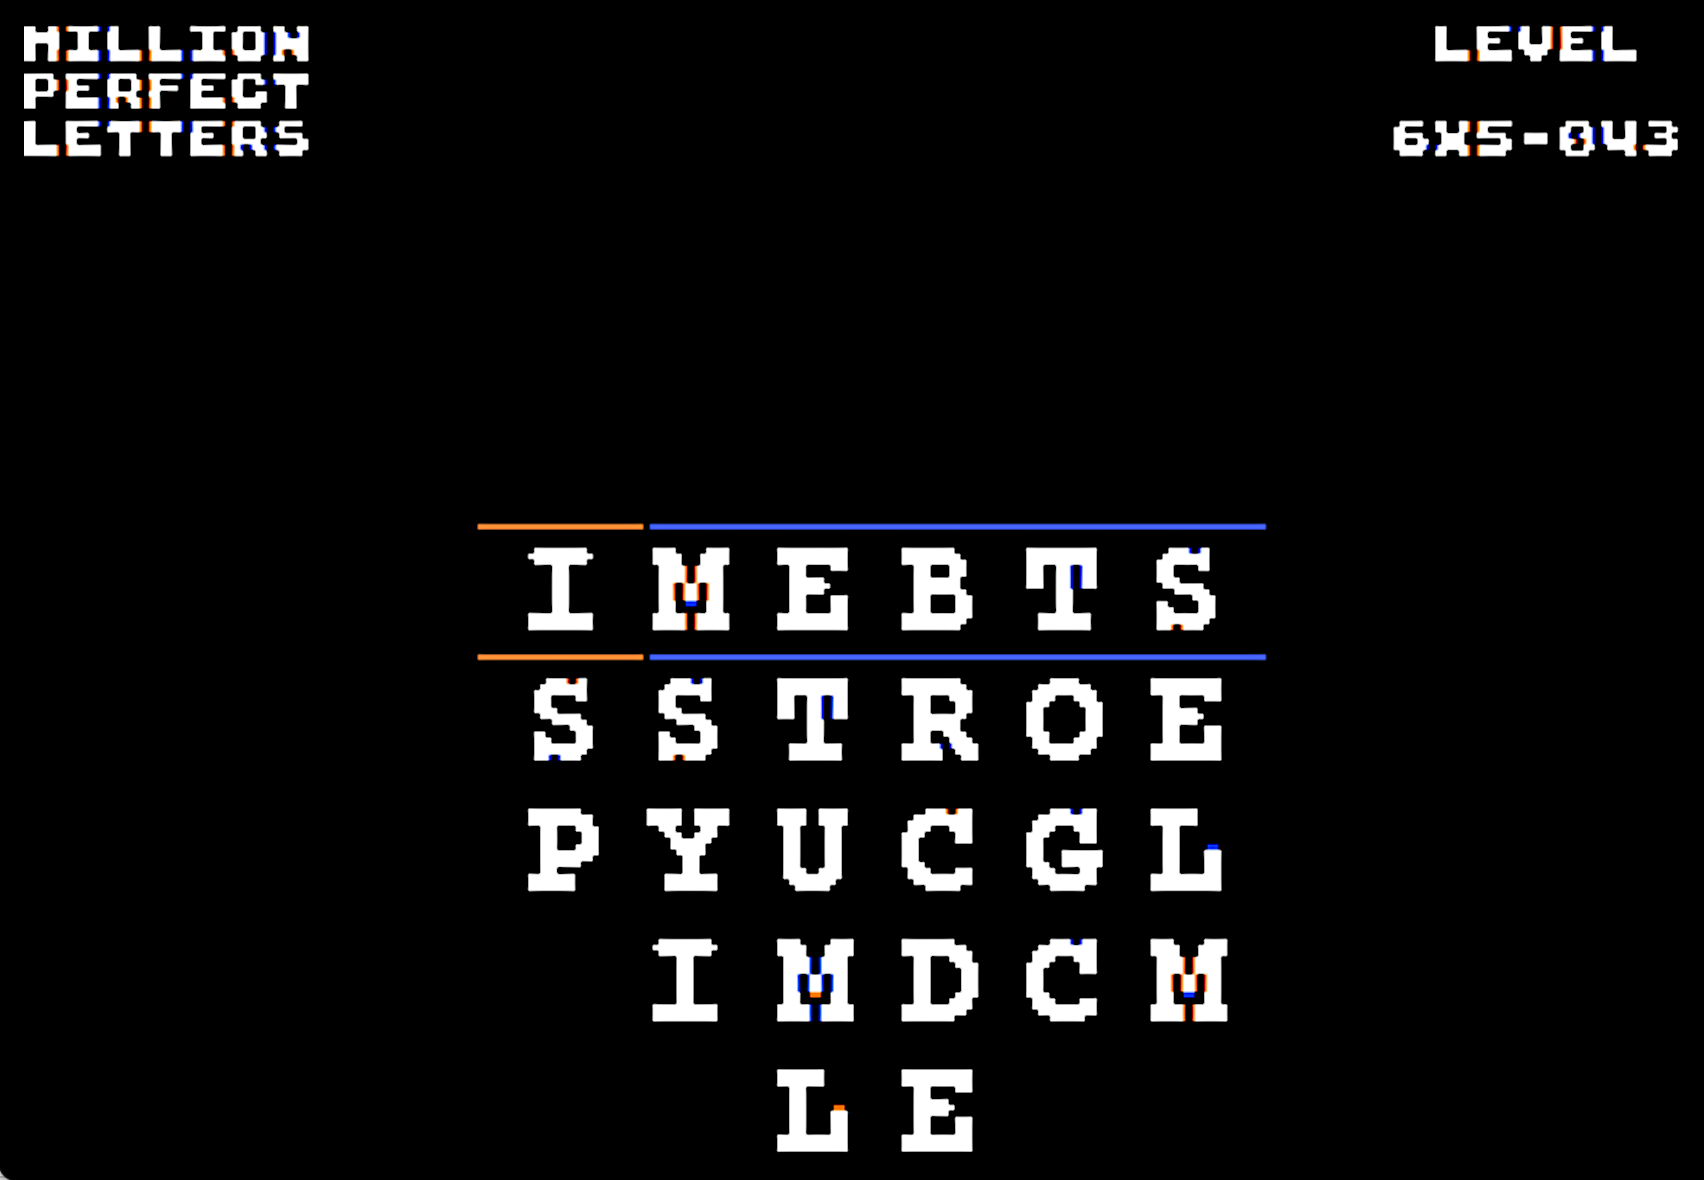 Screenshot of Million Perfect Letters